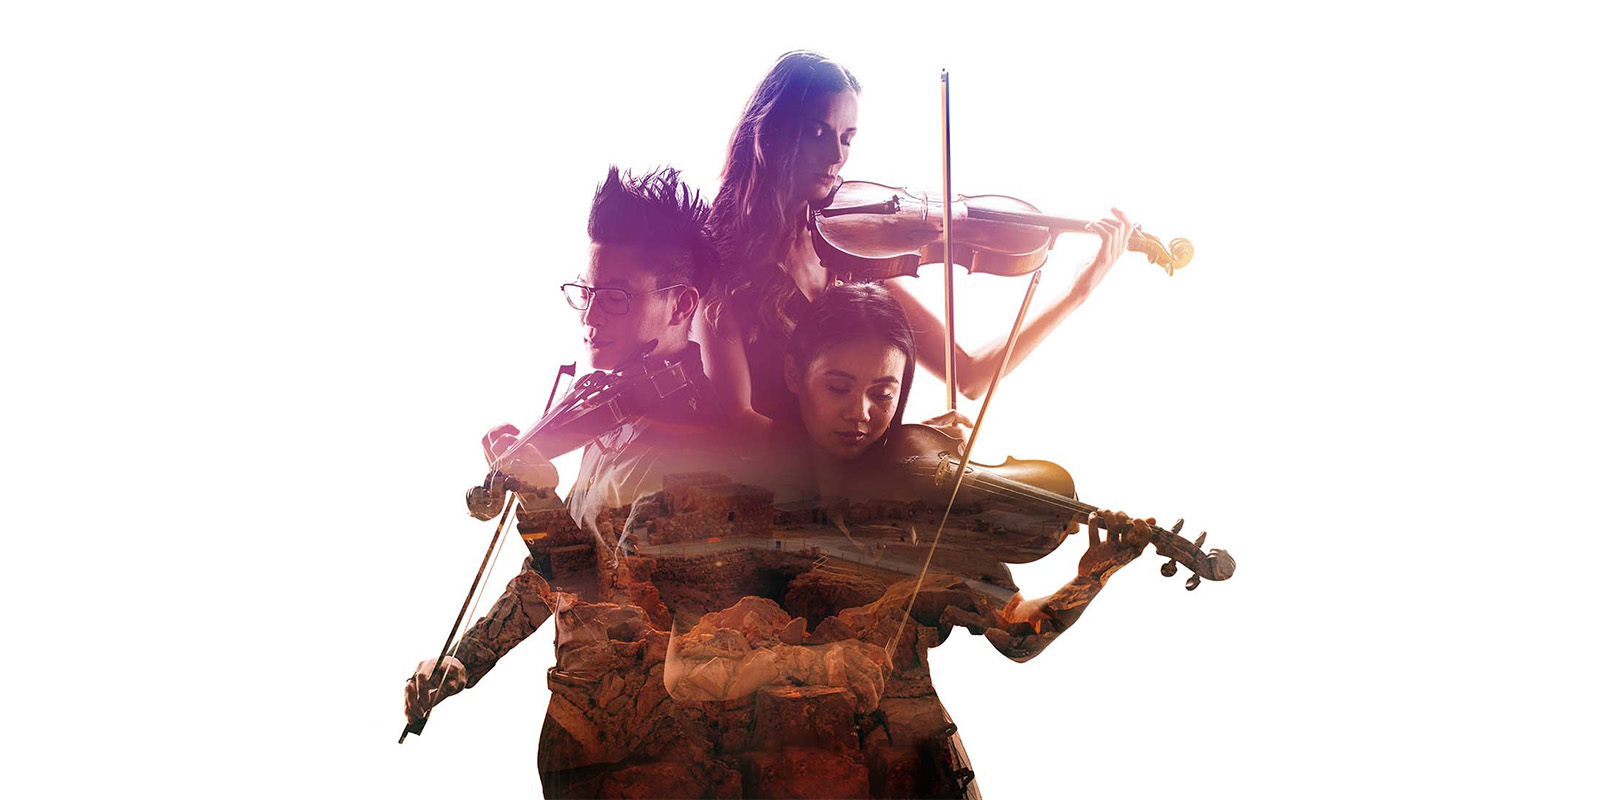 Silhouette of three violinists ona white background. The silhouette shows an image of an ancient stone building